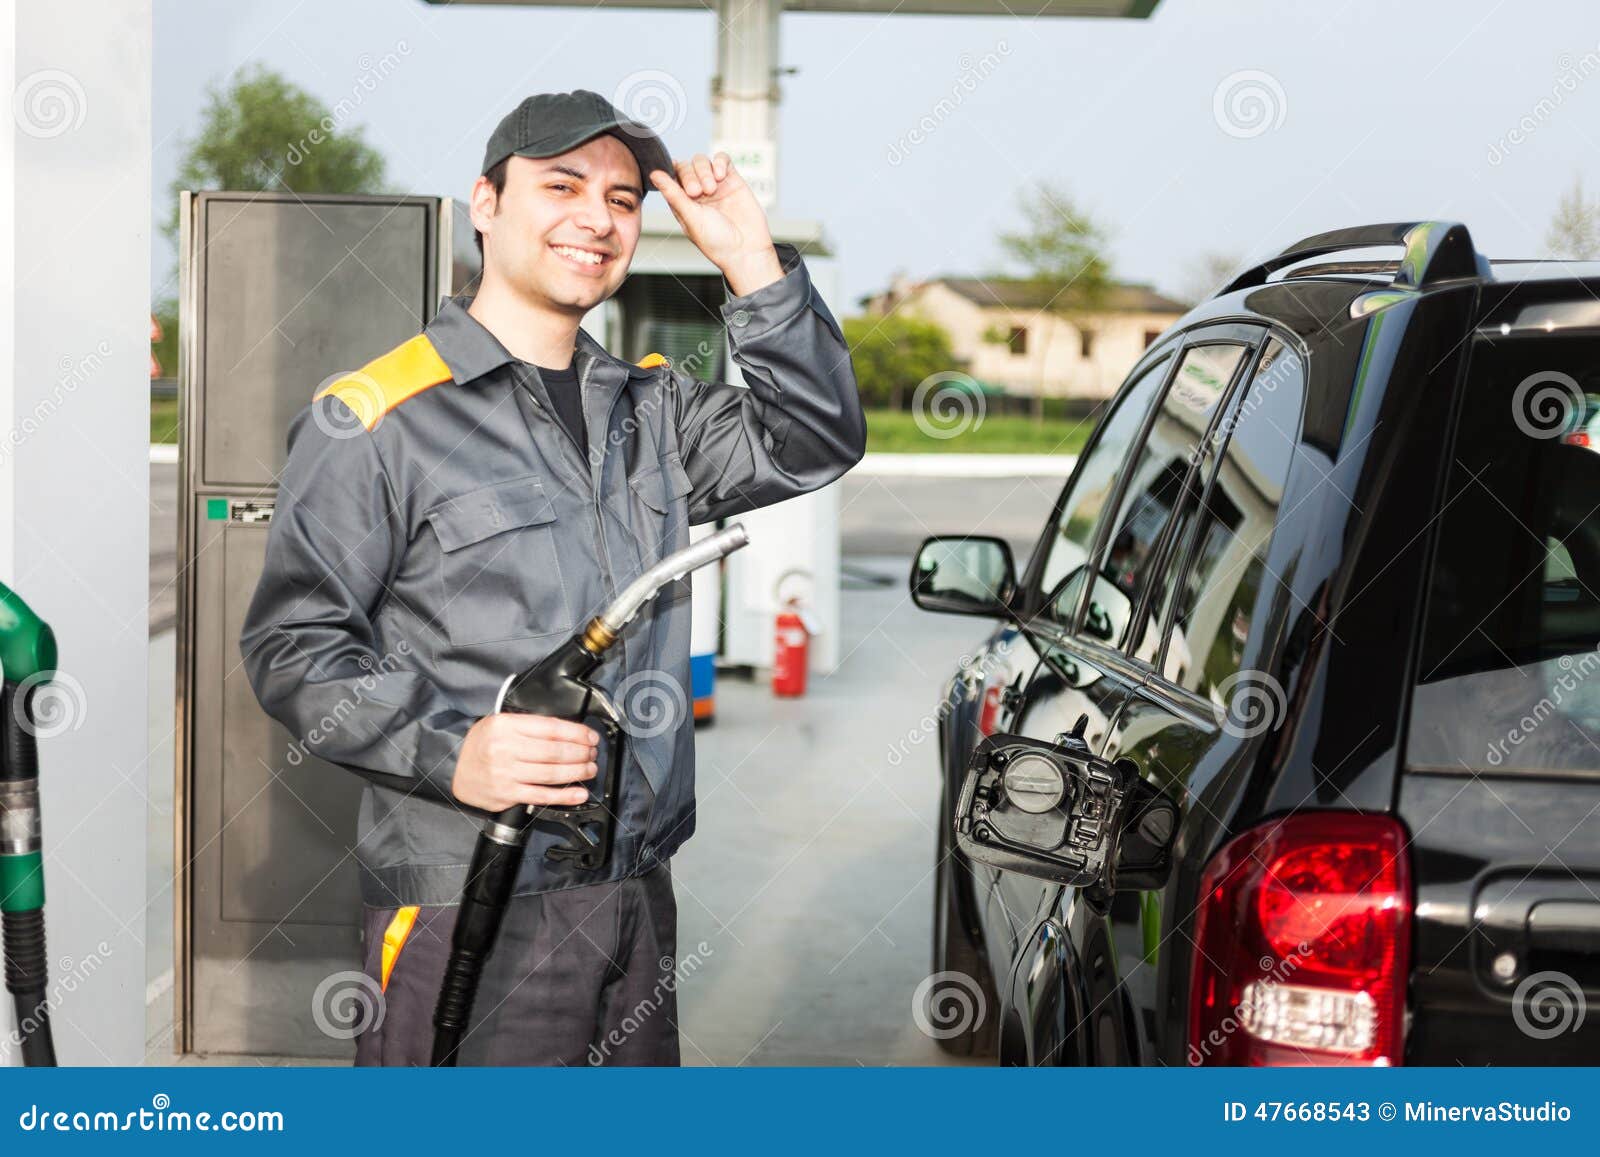 gas station attendant at work